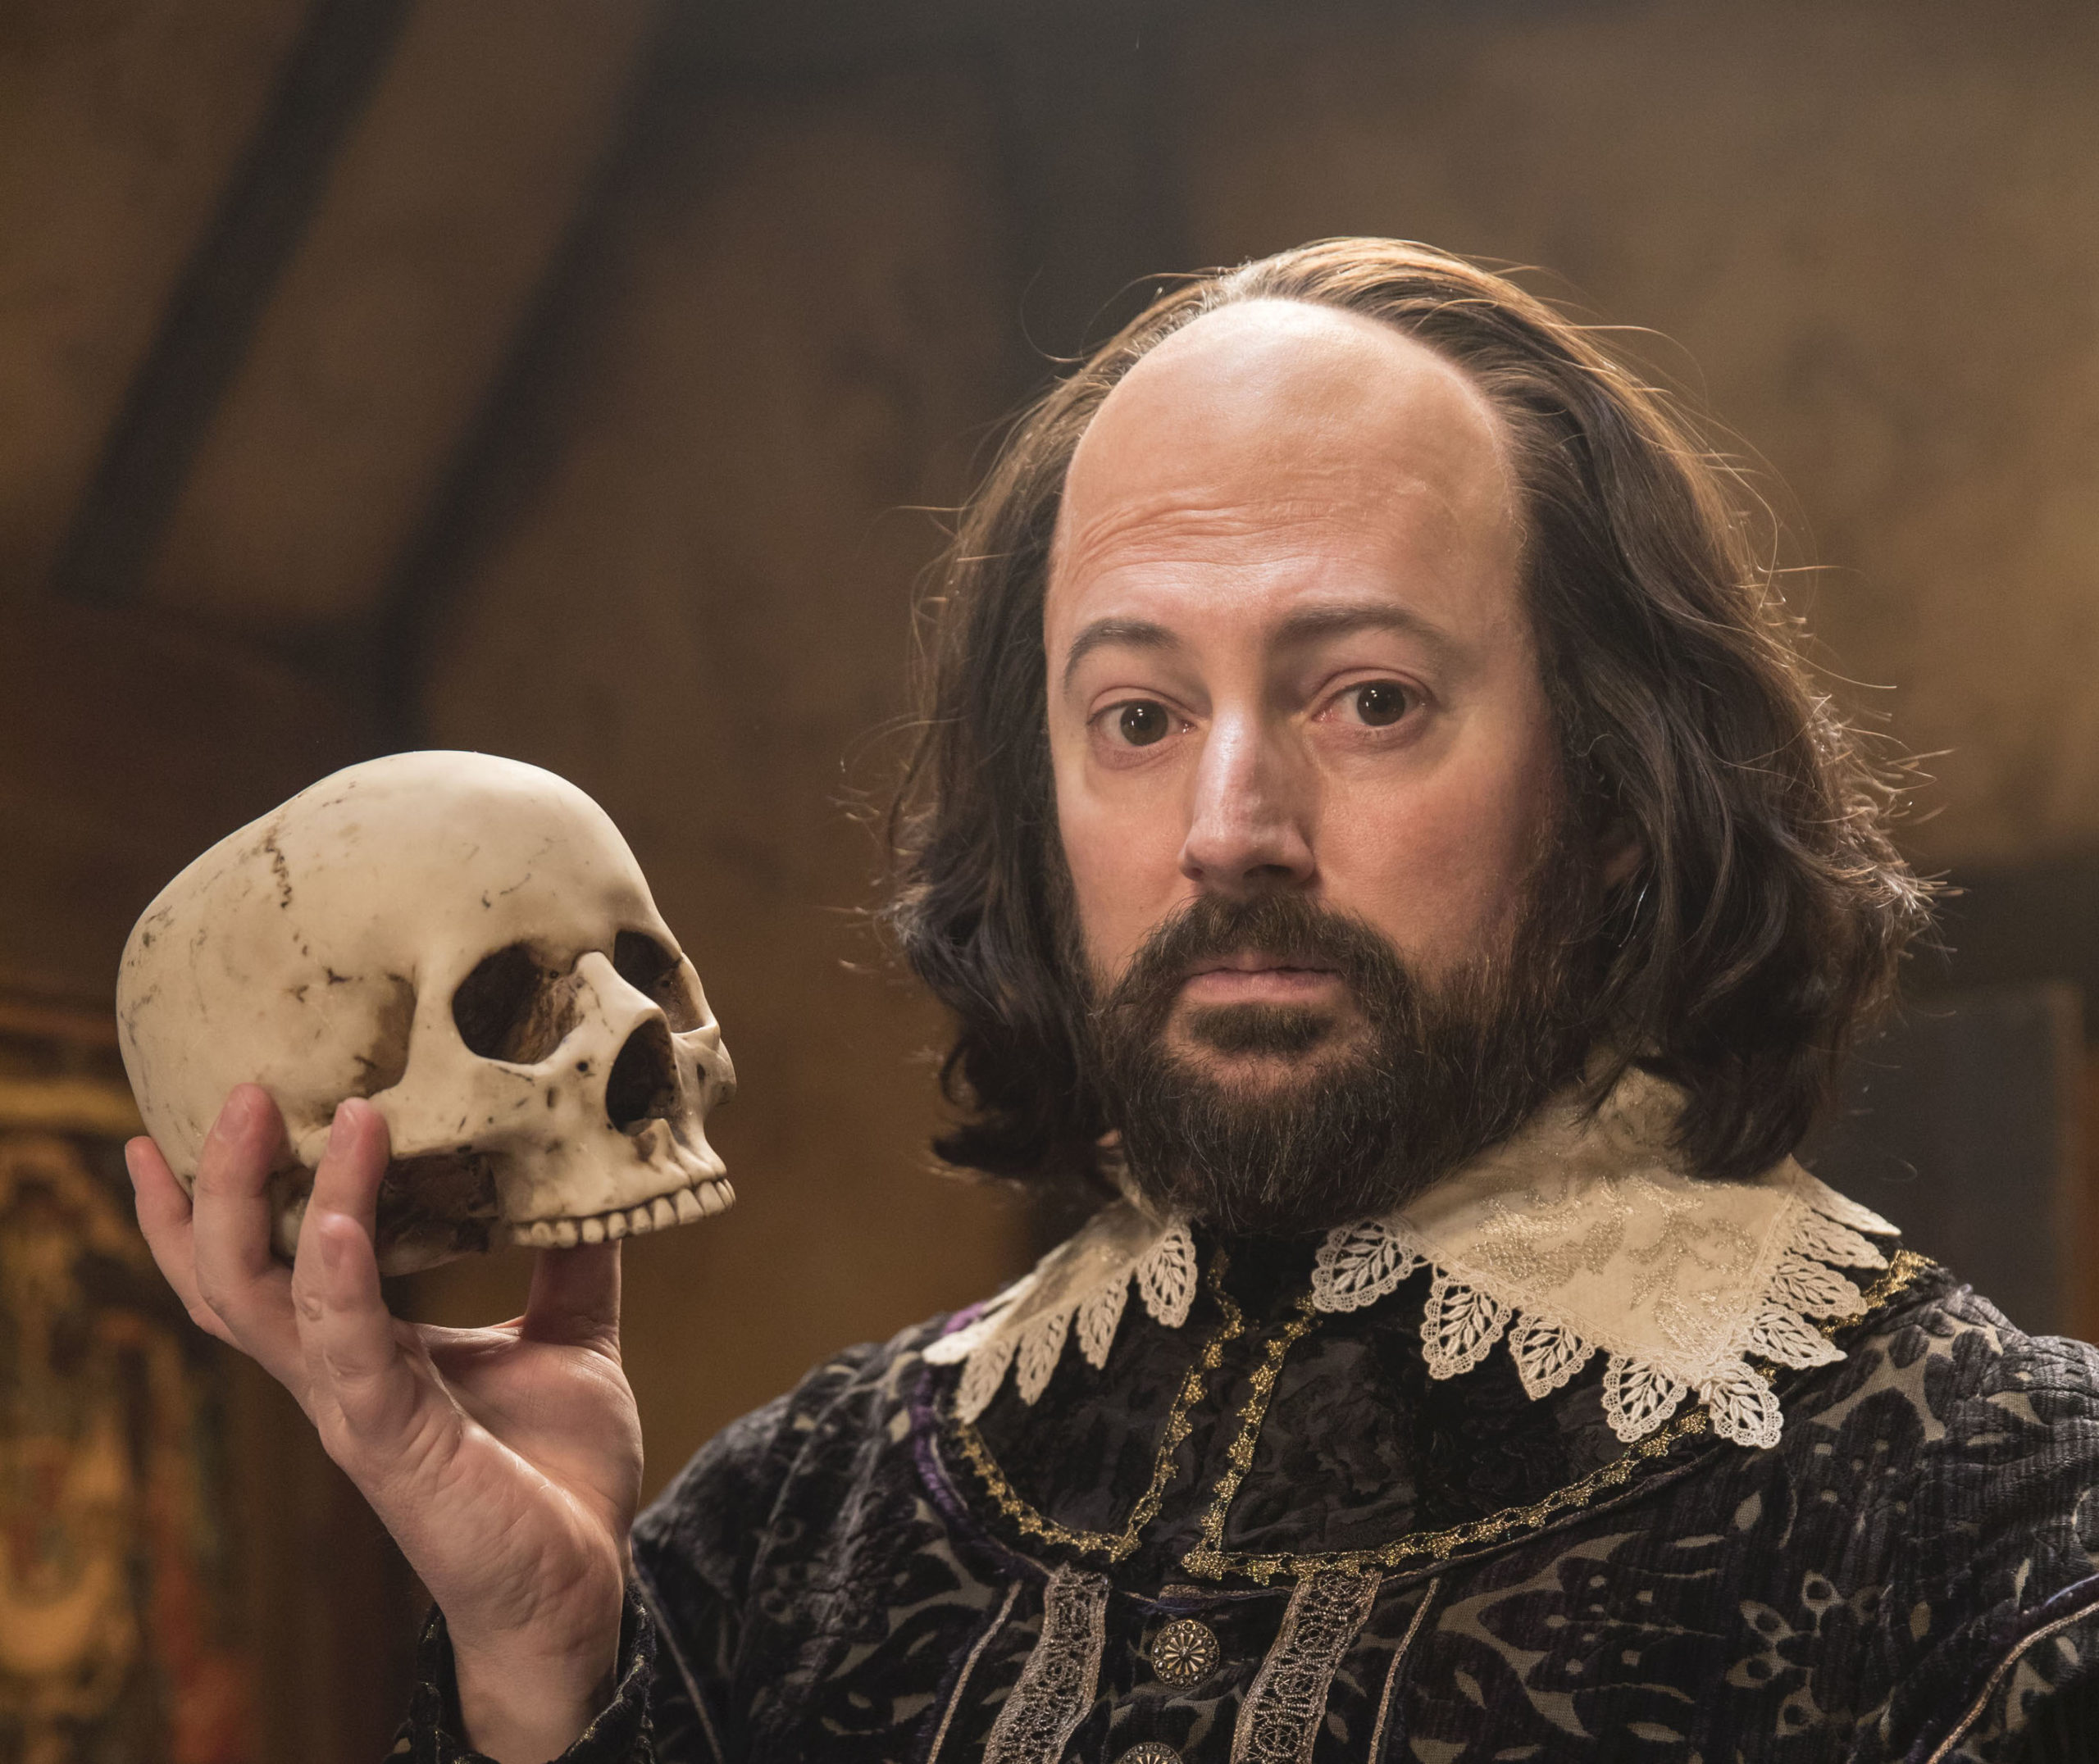 NEWS: David Mitchell to make West End debut in Ben Elton’s stage adaptation of Upstart Crow